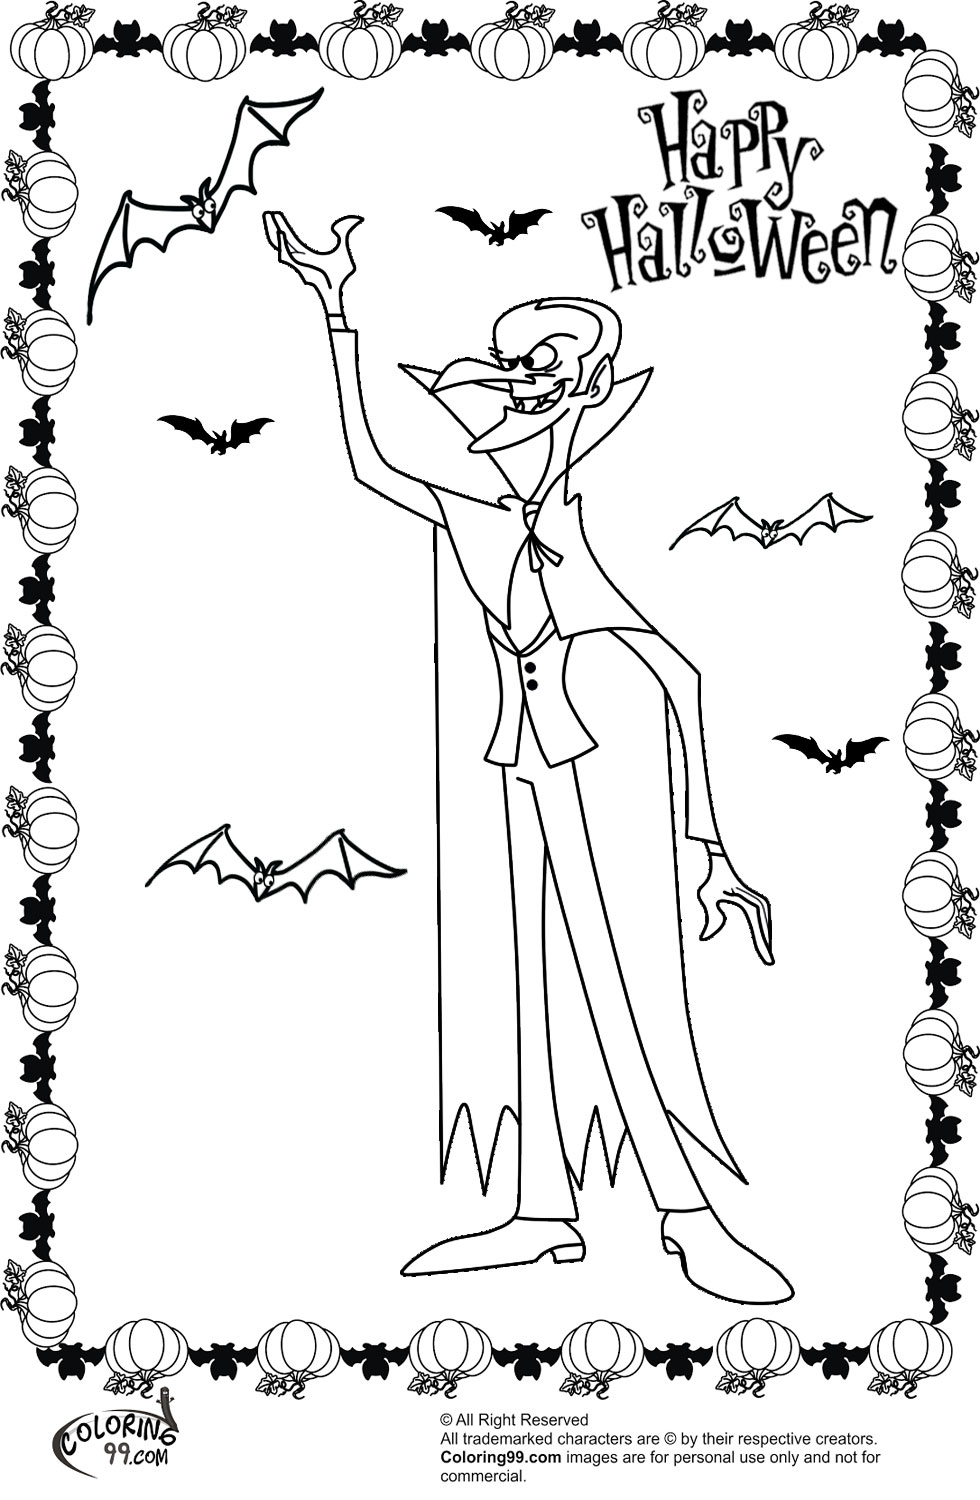 Halloween Dracula Coloring Pages | Team colors